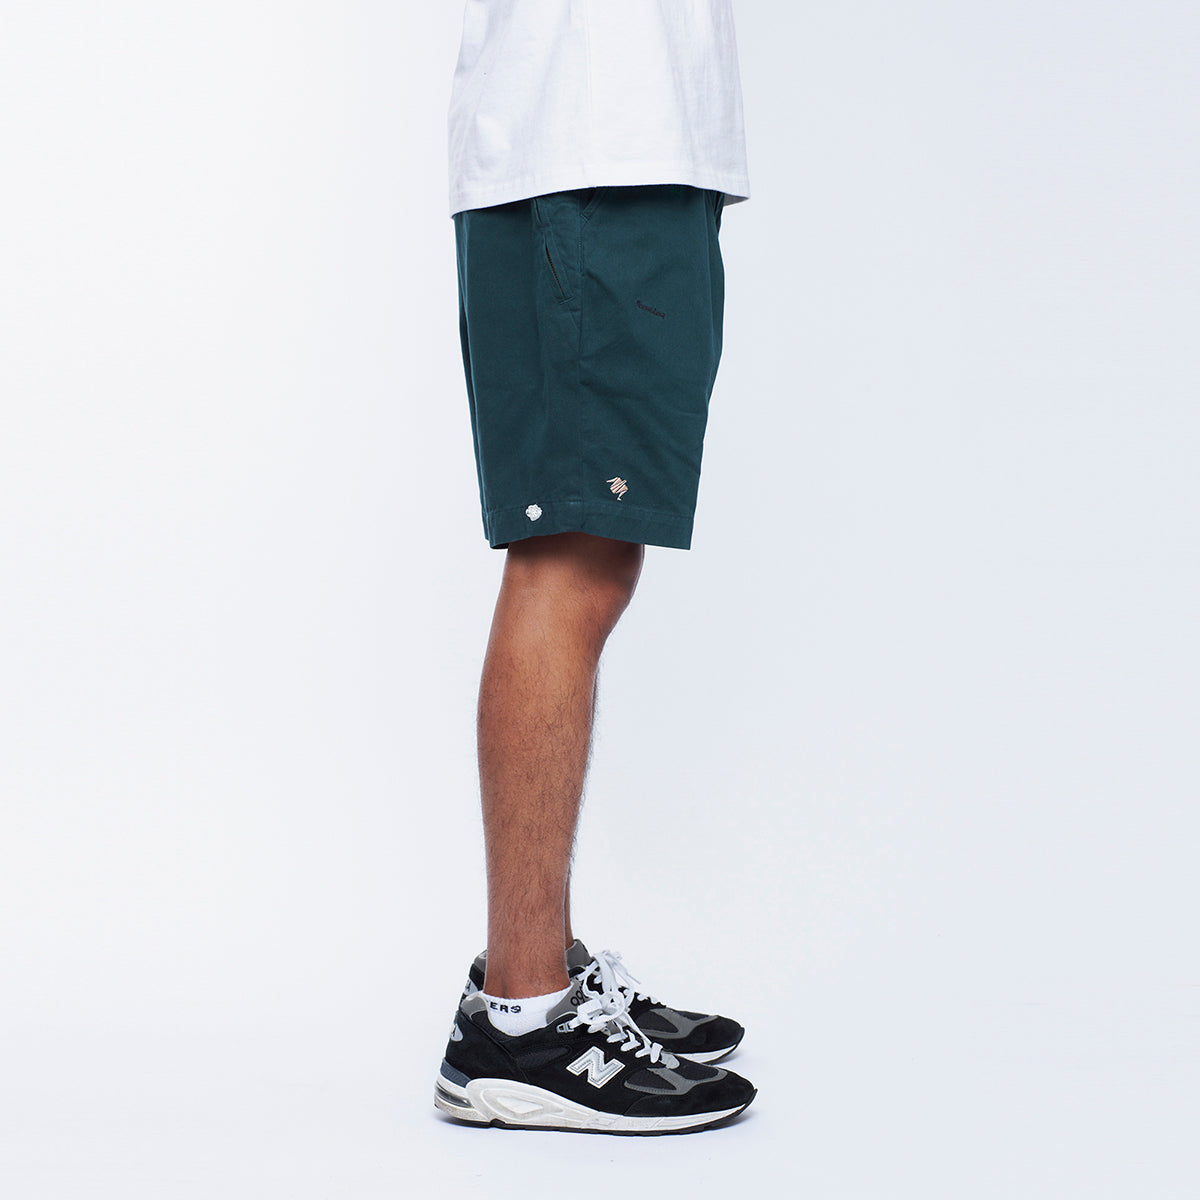 LR EMBROIDERY SHORTS